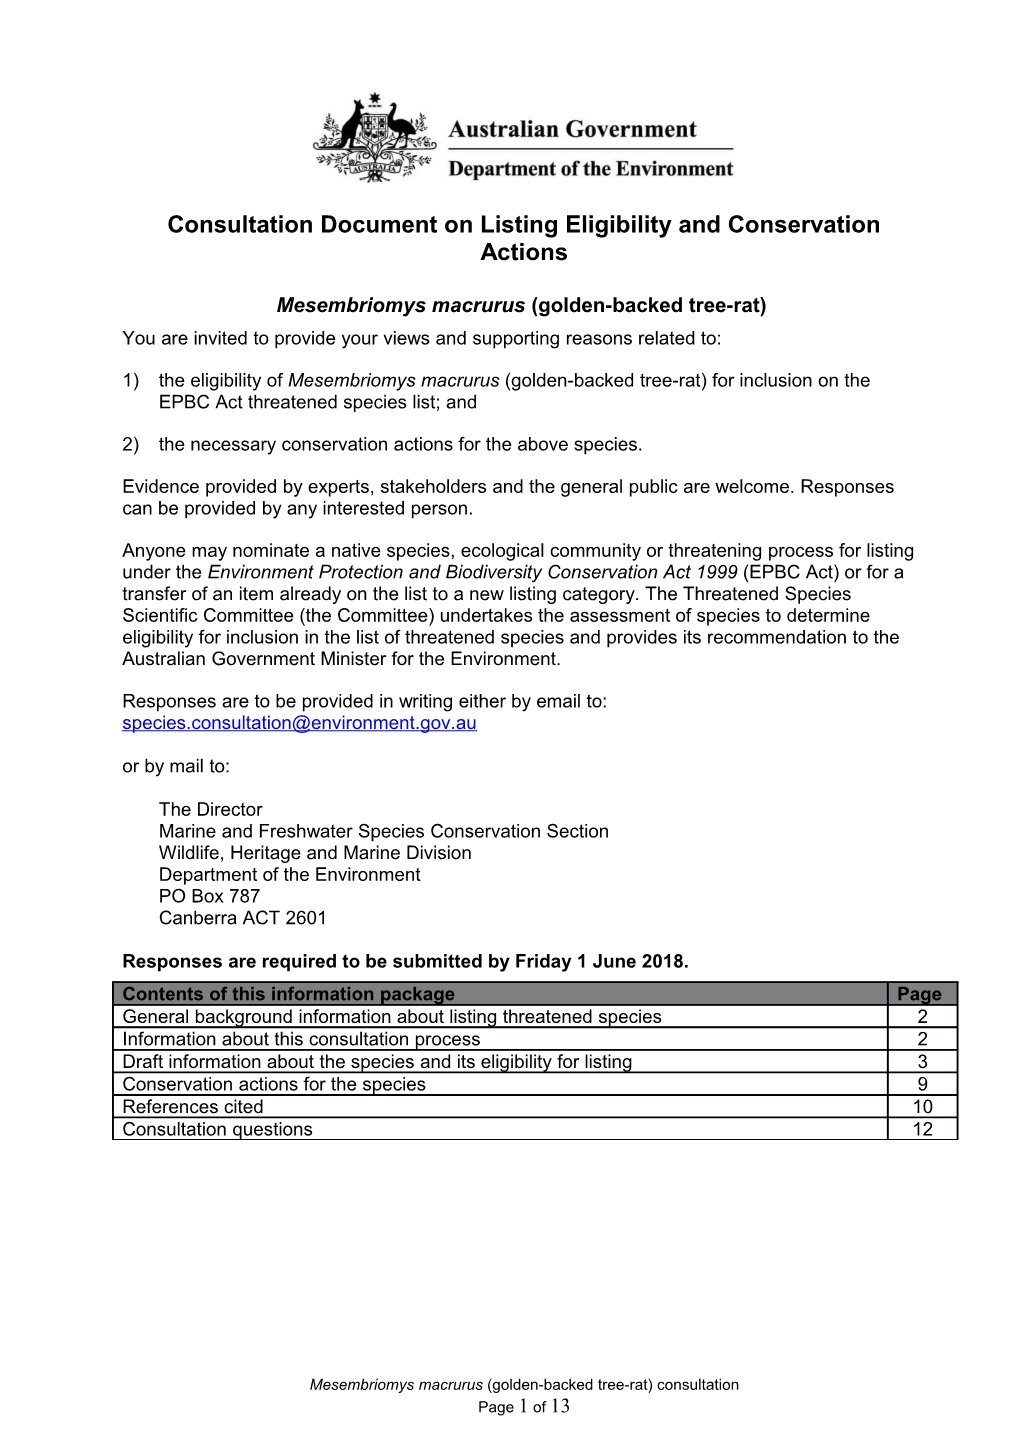 Consultation Document on Listing Eligibility and Conservation Actions: Mesembriomys Macrurus